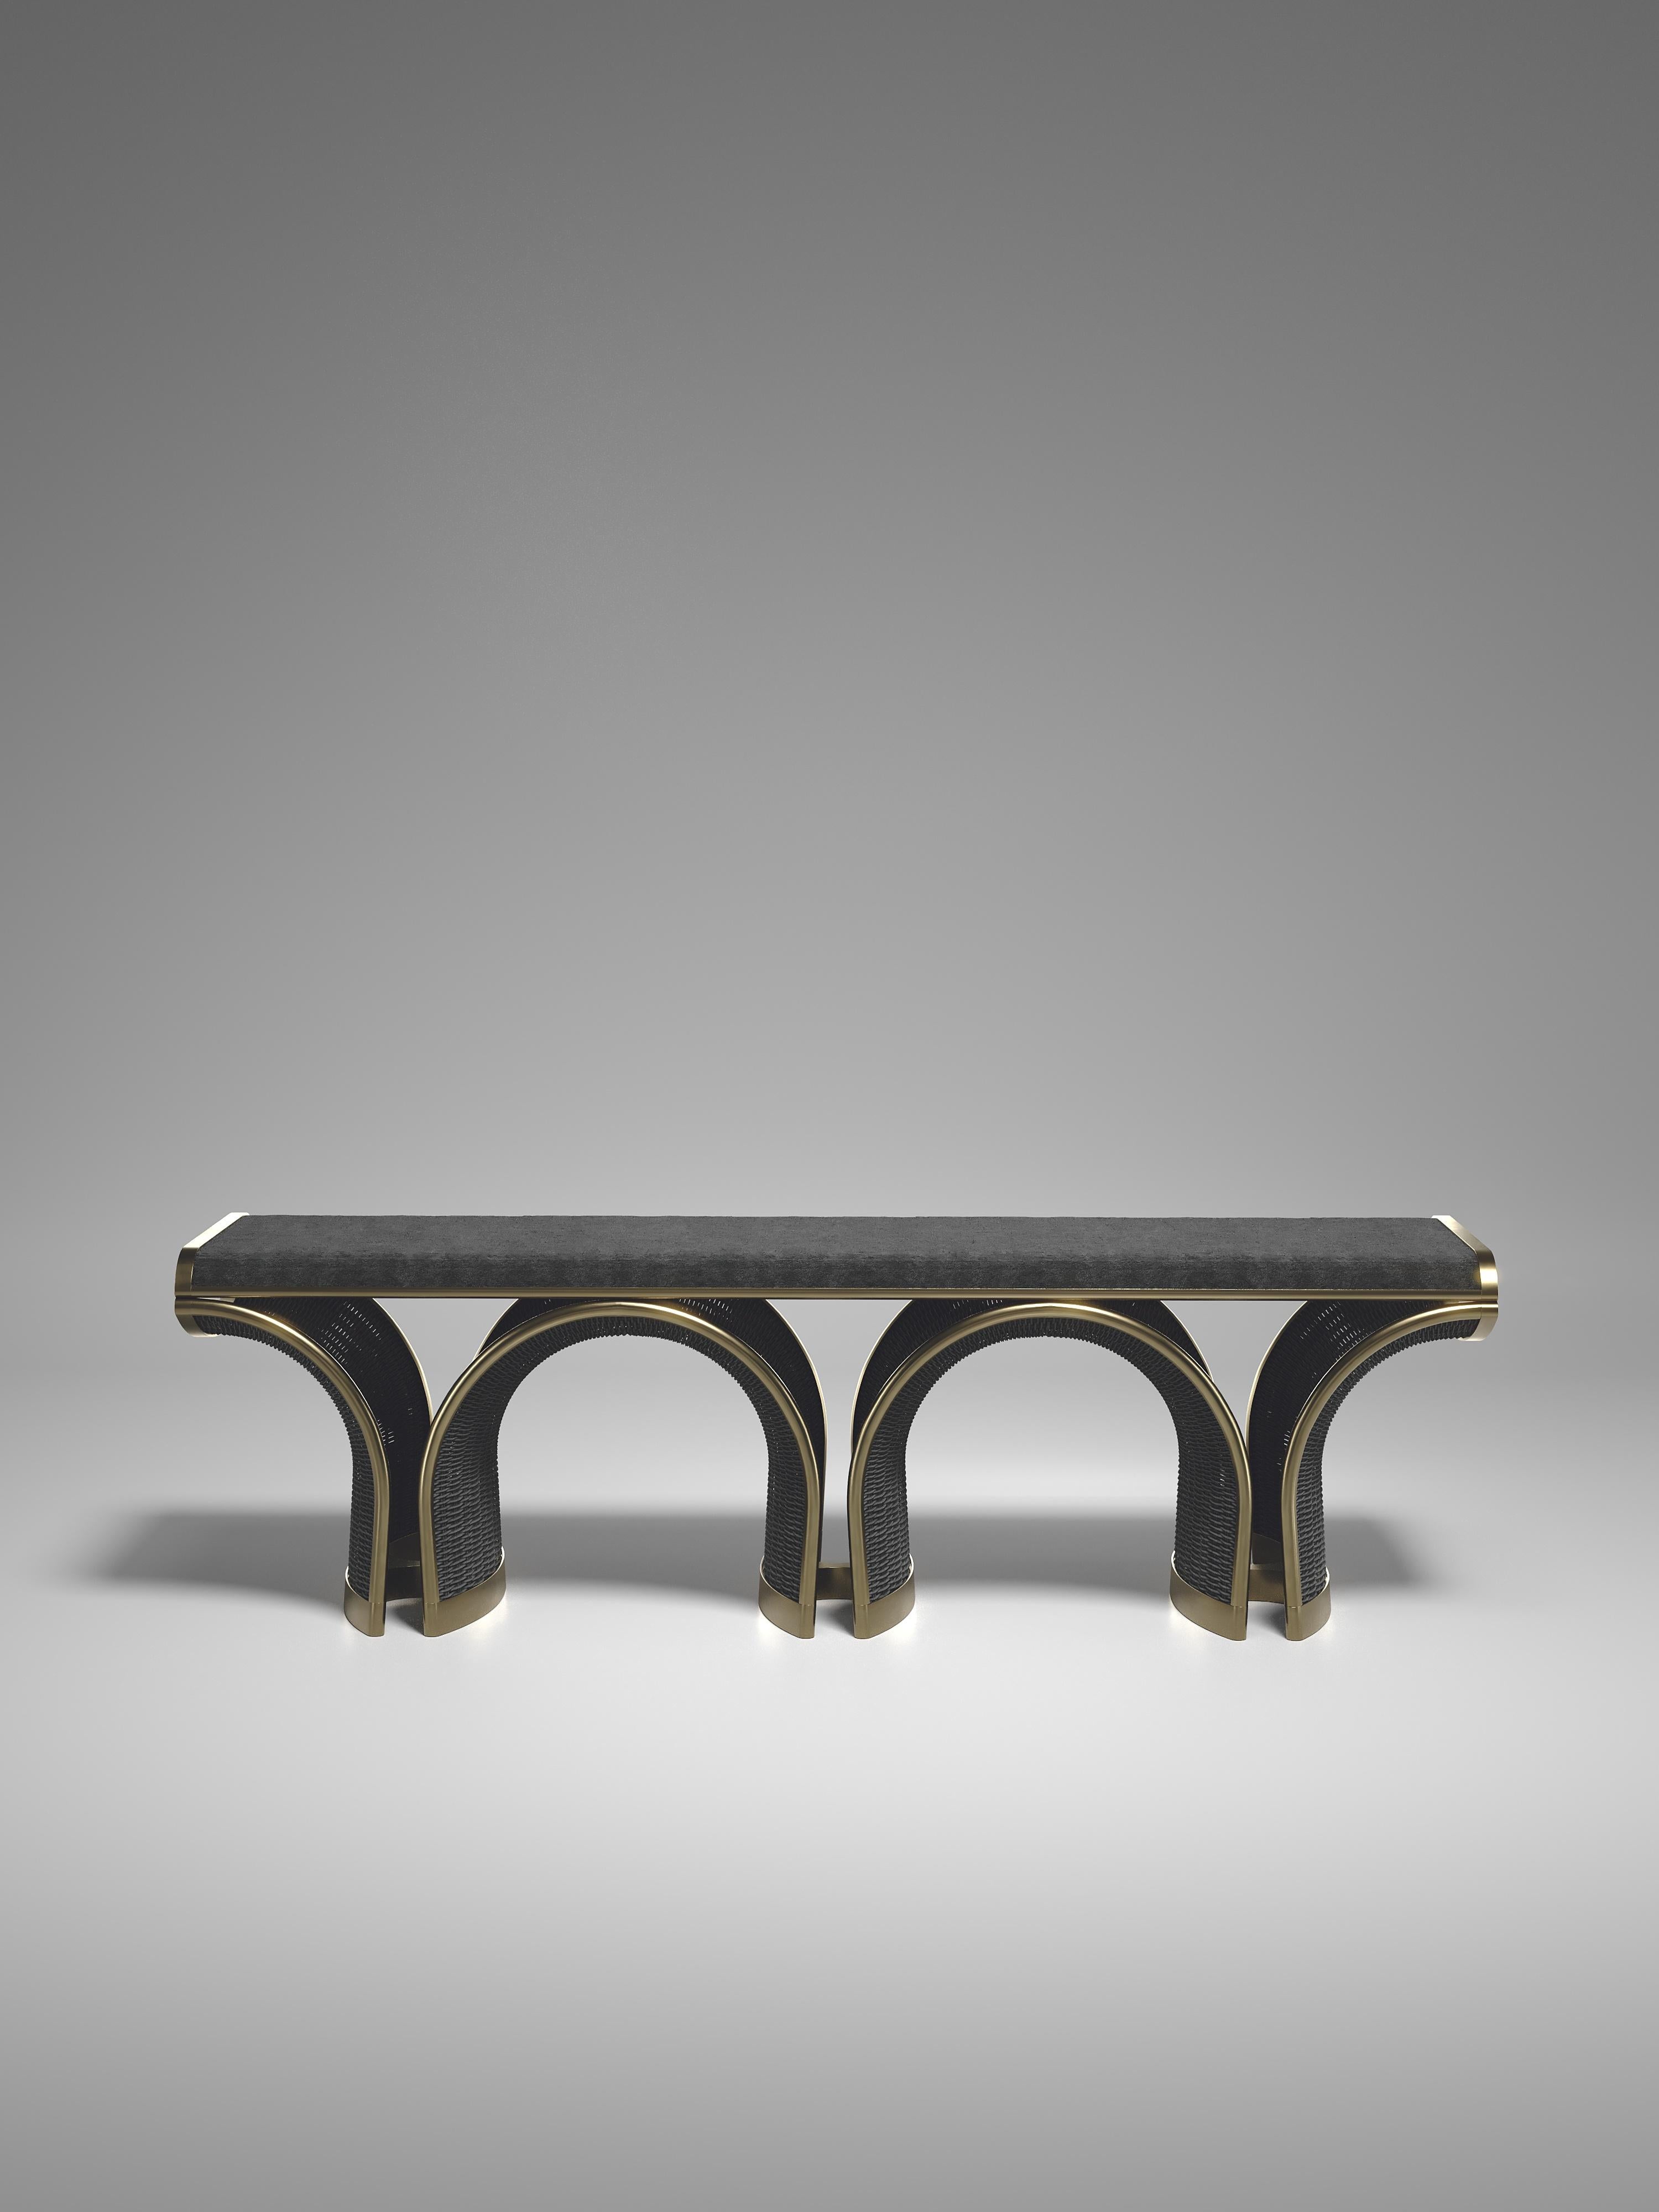 The Nymphea Bench by R & Y Augousti is a part of their new Rattan capsule launch. The piece explores the brand's iconic DNA of bringing old world artisanal craft into a contemporary and utterly luxury feel. This seating piece is done in a black